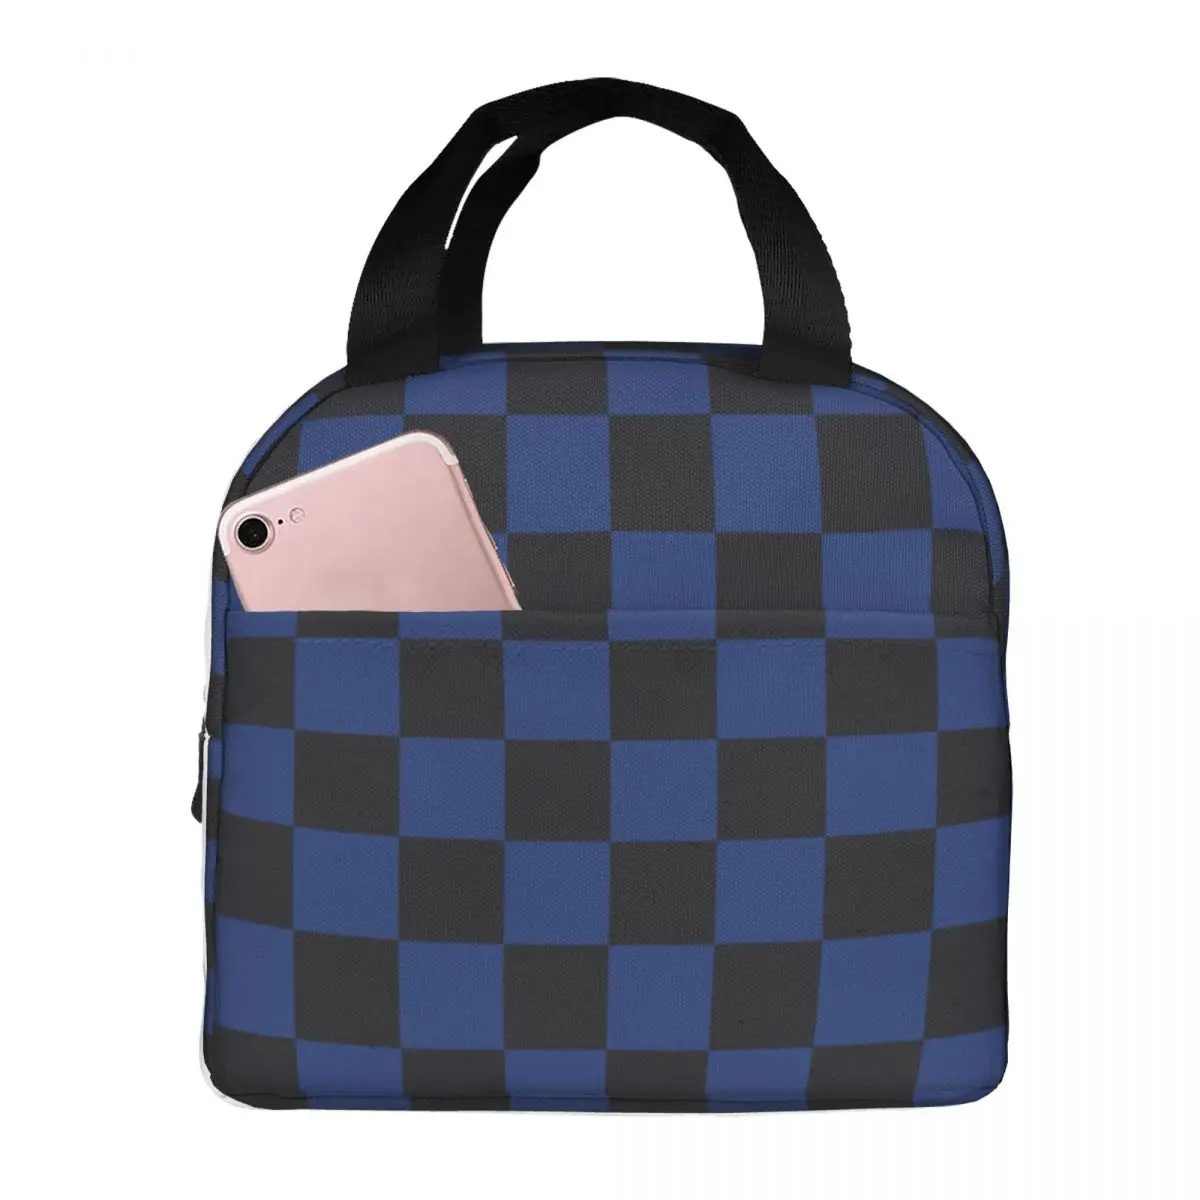 Lunch Bags for Men Women Modern Black Blue Croatian Checkerboard Insulated Cooler Bag Portable Picnic Work Canvas Tote Food Bag